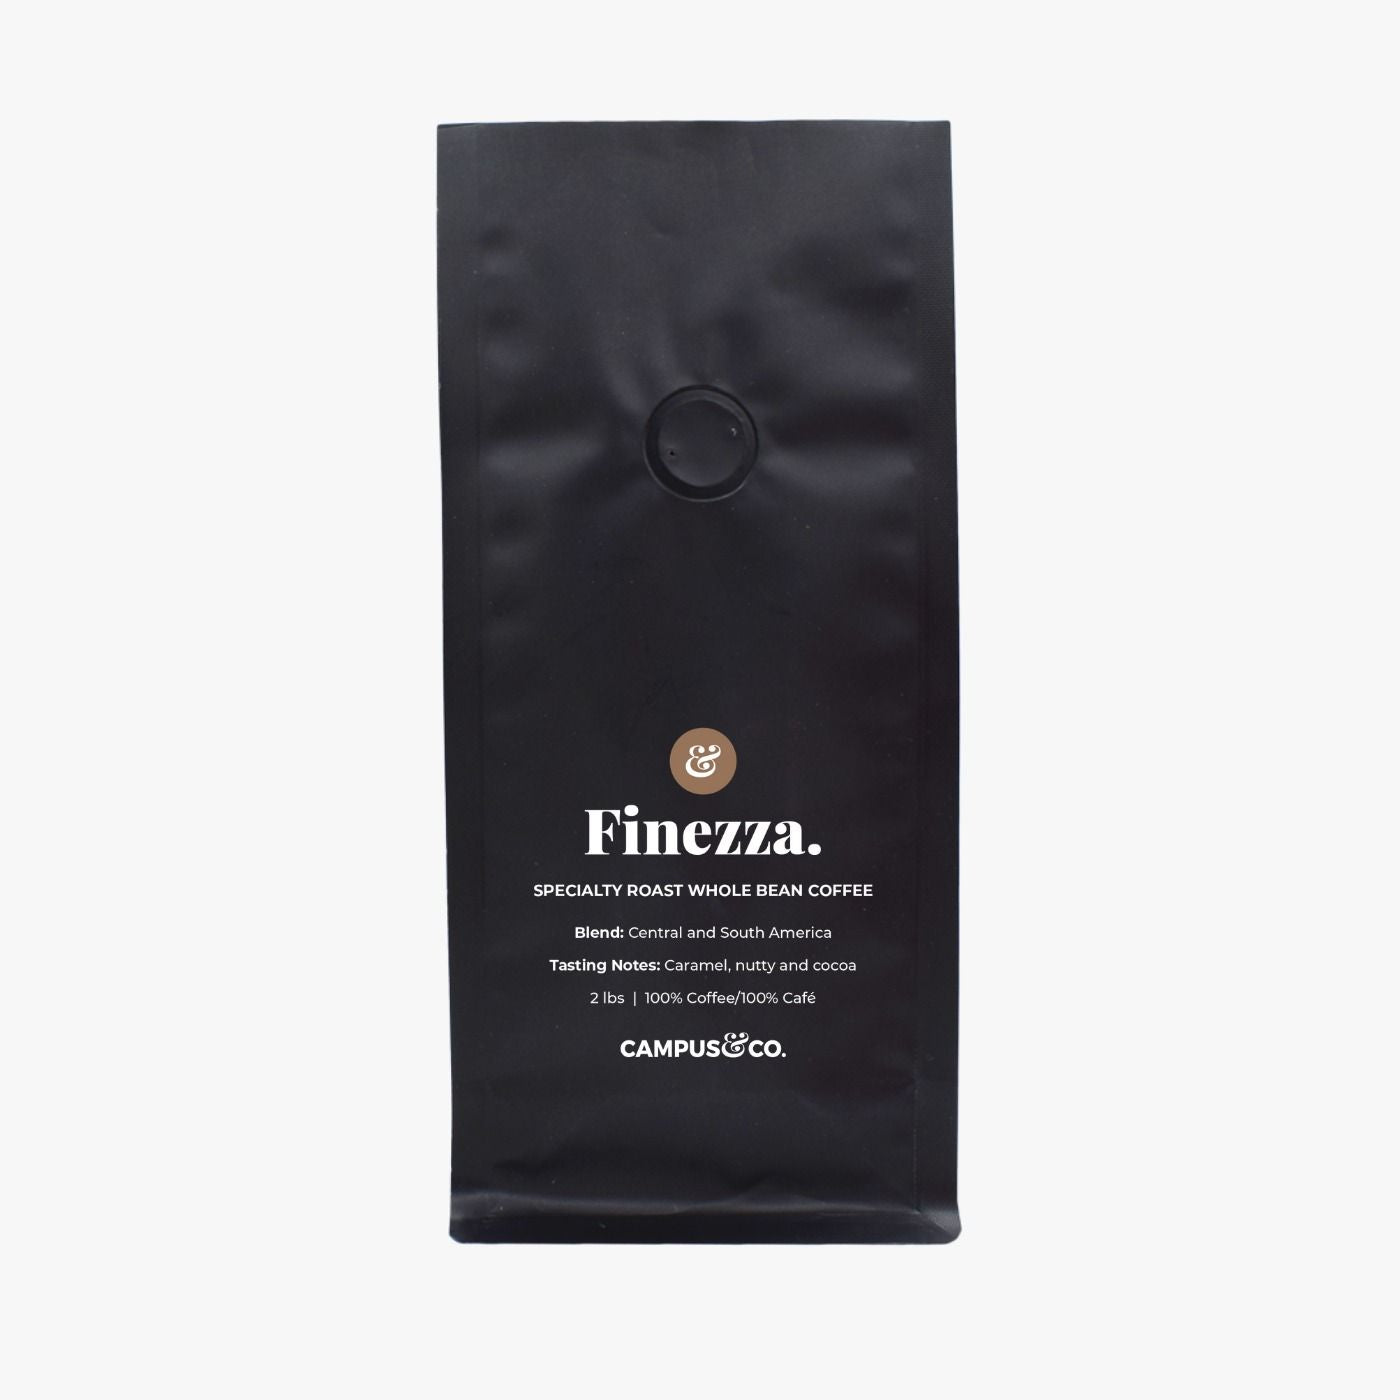 Campus&Co. Finezza Specialty Roast Coffee Beans 2lbs